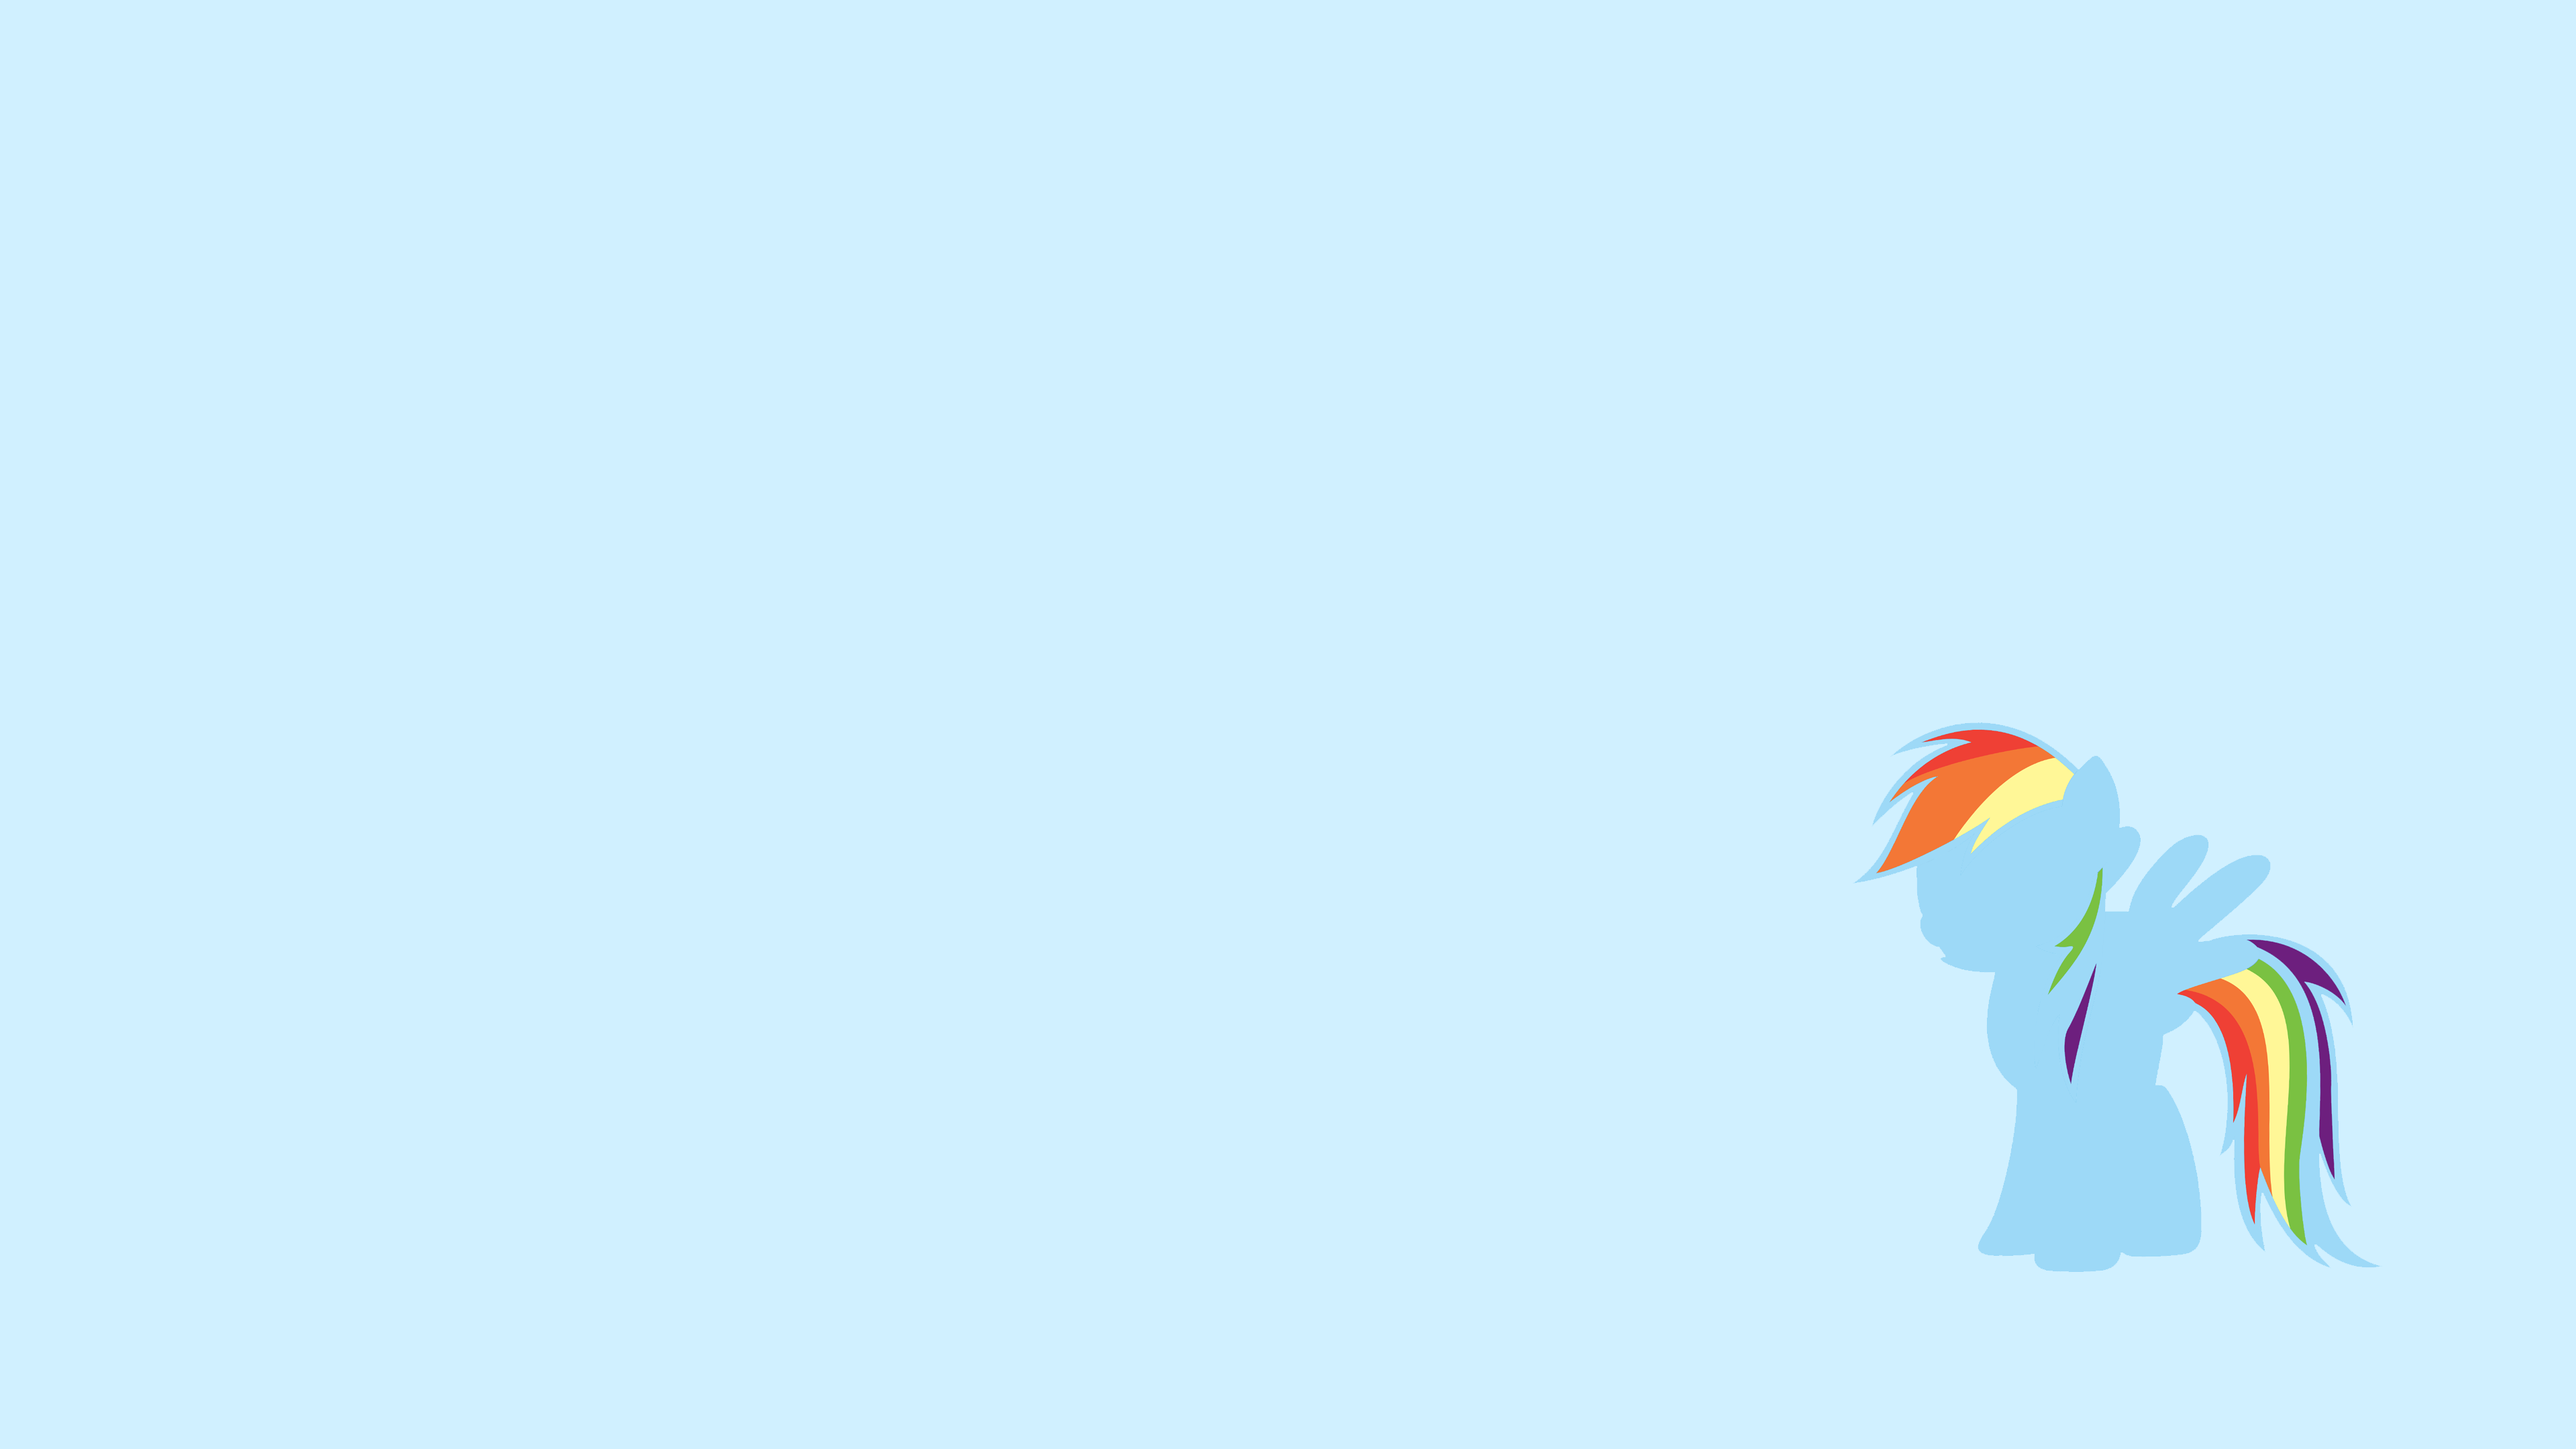 Simple Wallpapers - Rainbow Dash by DaVca